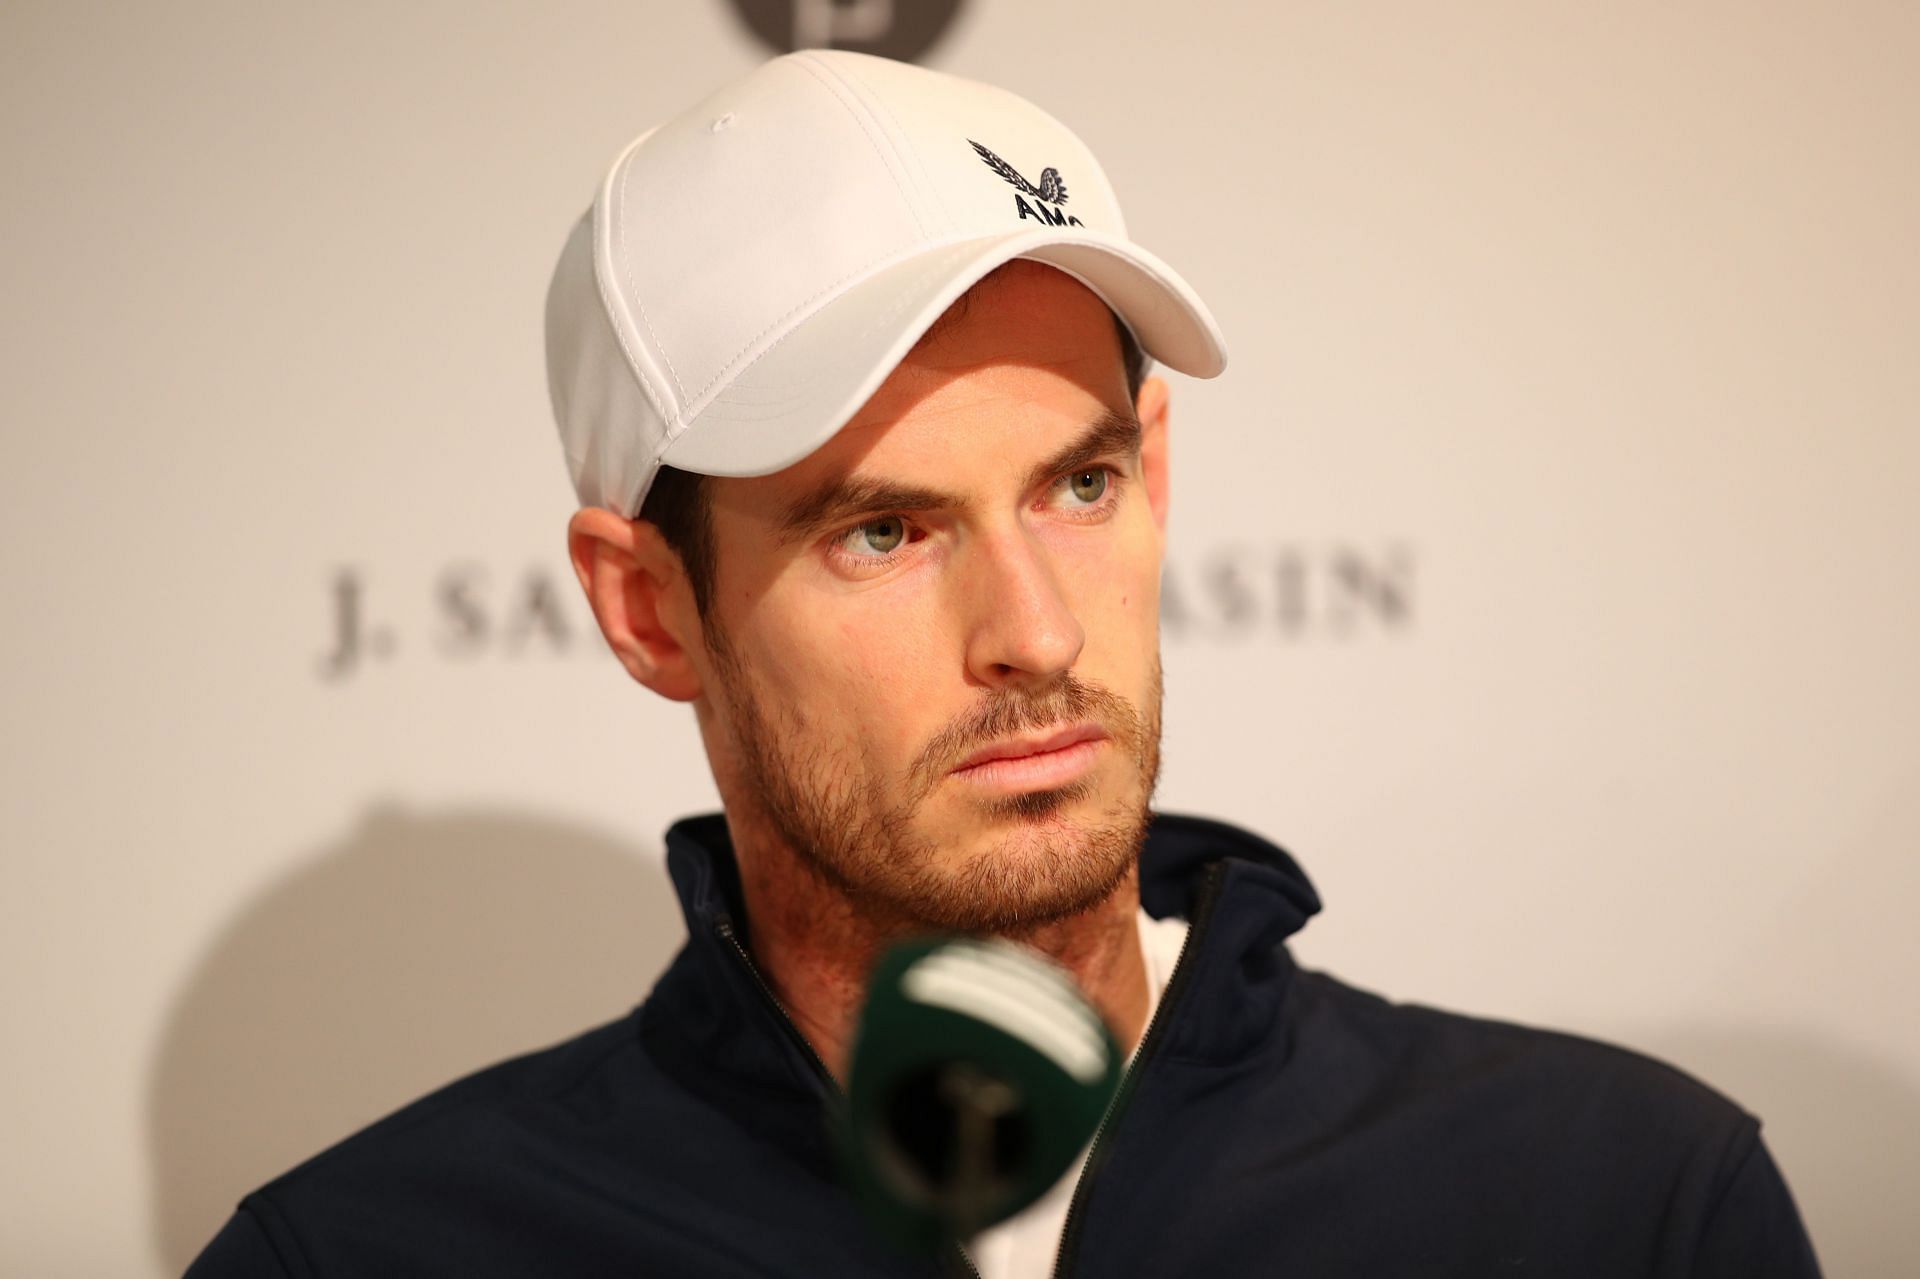 Three times Andy Murray stood for women’s sport